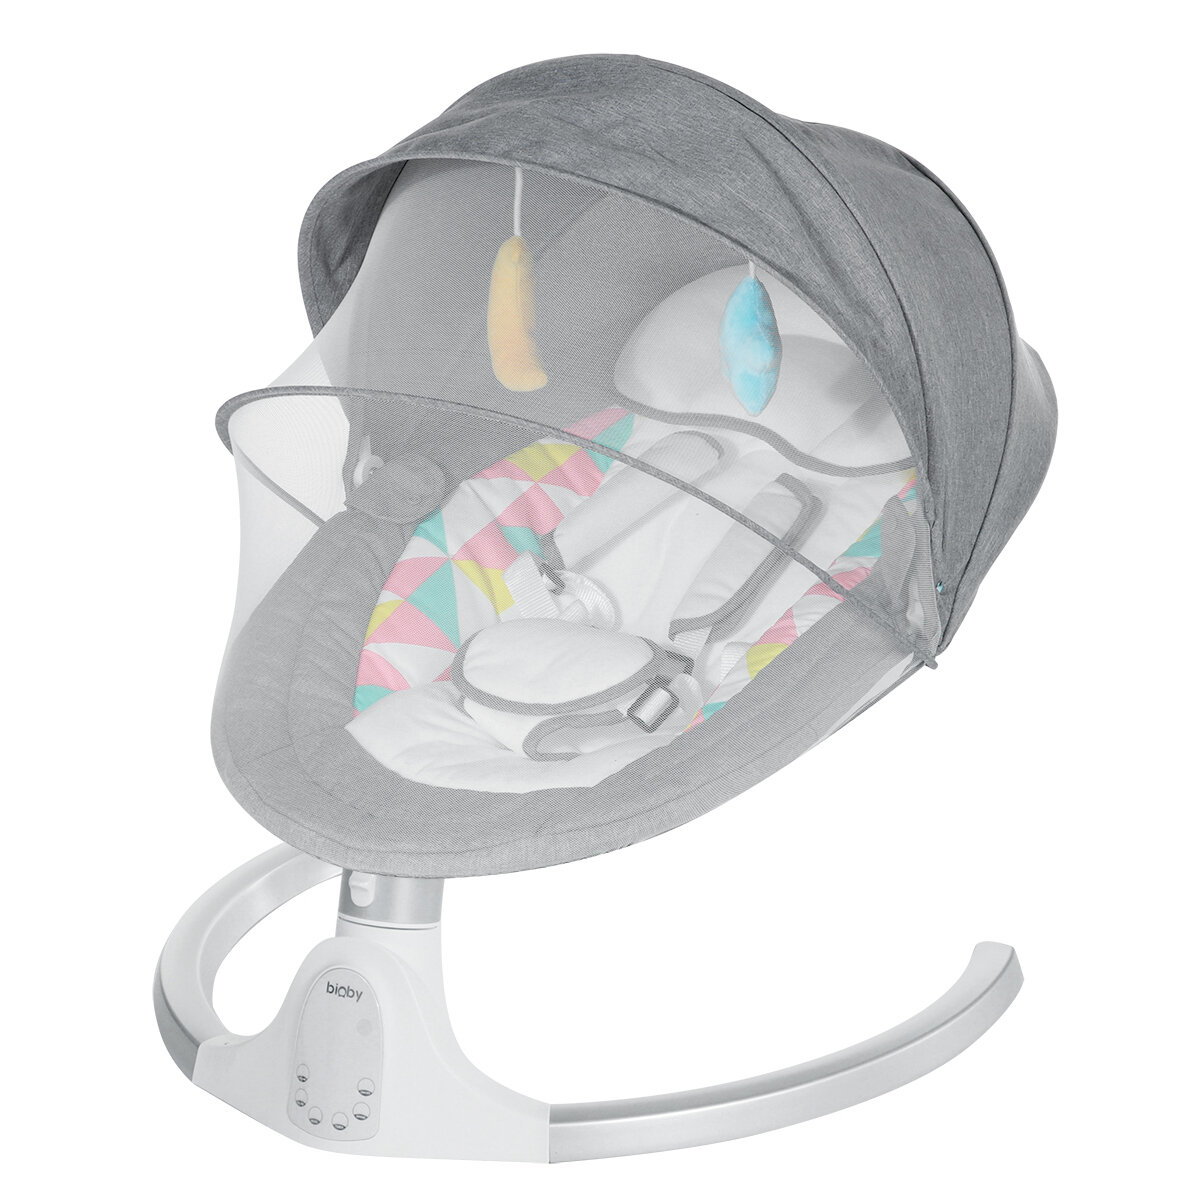 best price,bioby,electric,baby,swing,chair,bluetooth,music,eu,discount